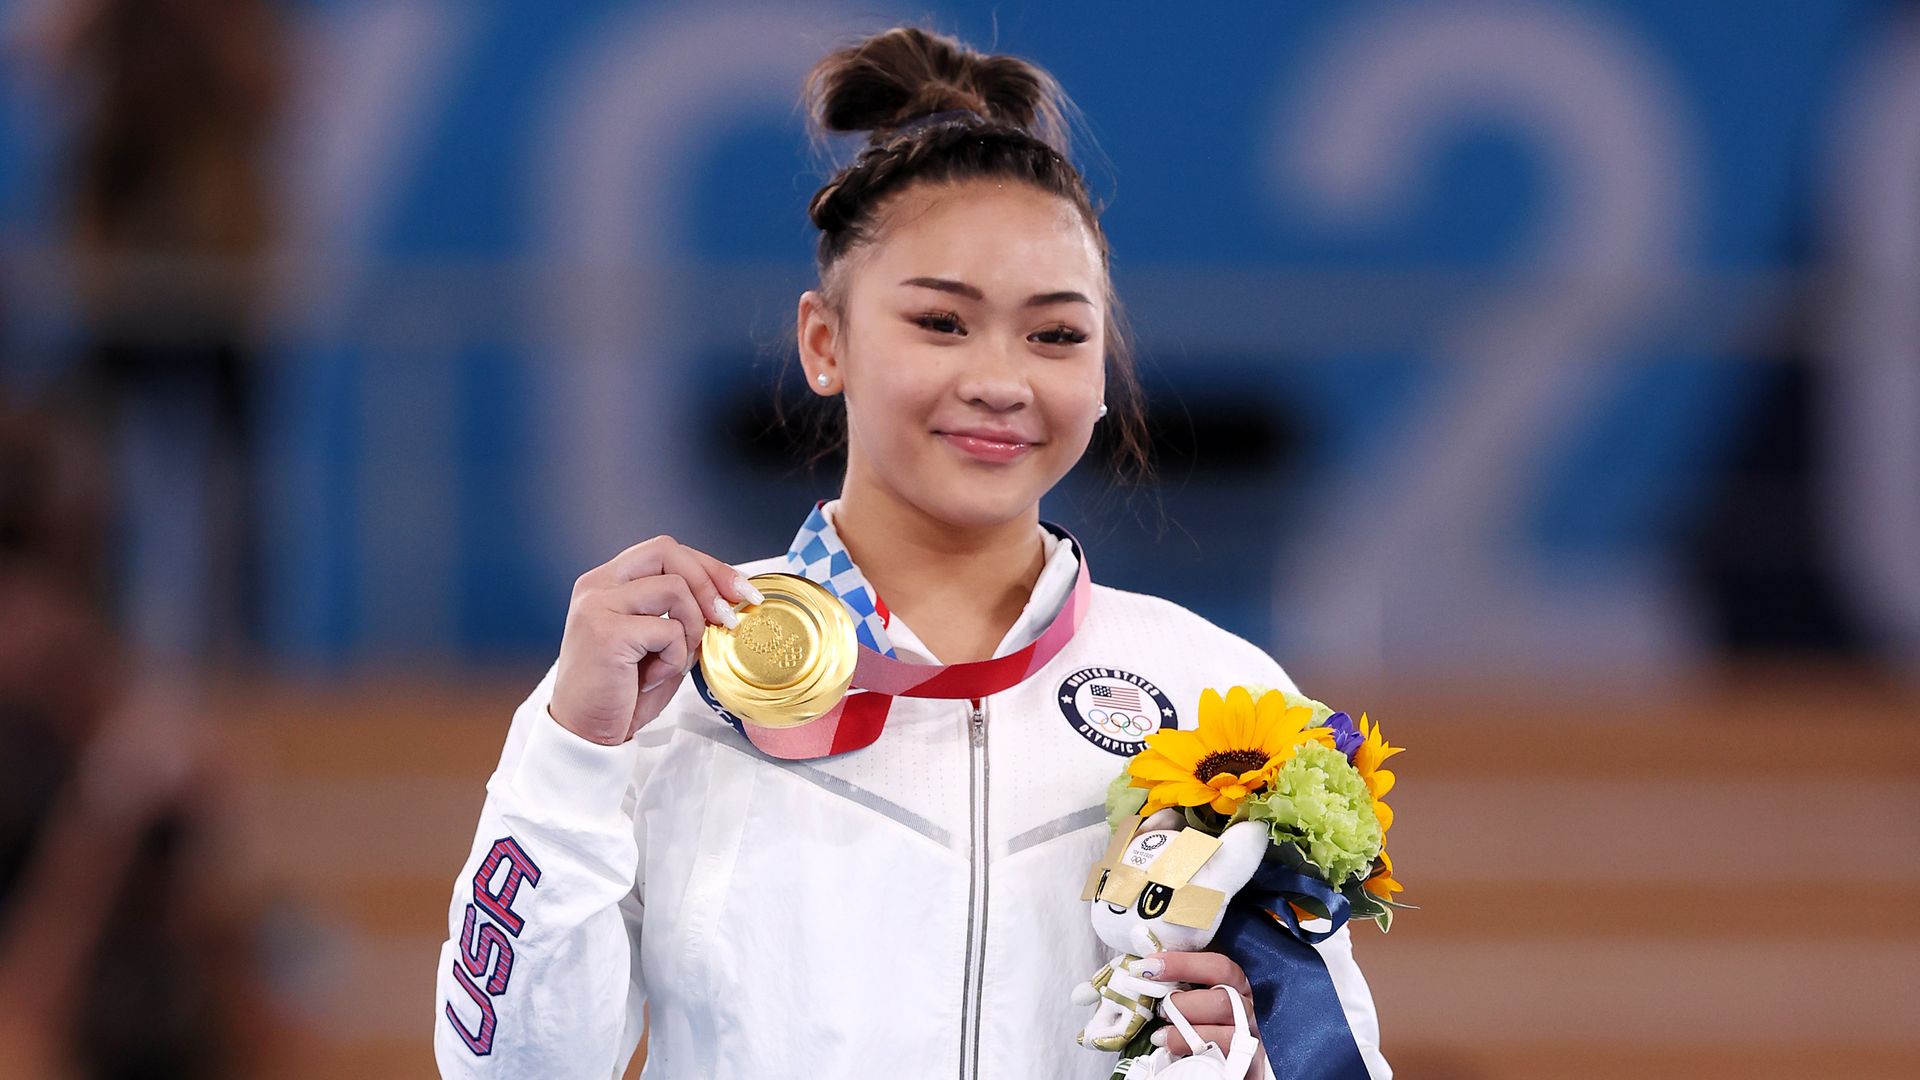 Sunisa Lee of Team USA with her gold medal after winning the Women's All-Around Final at the Tokyo 2020 Olympic Games on July 29, 2021 in Tokyo, Japan.